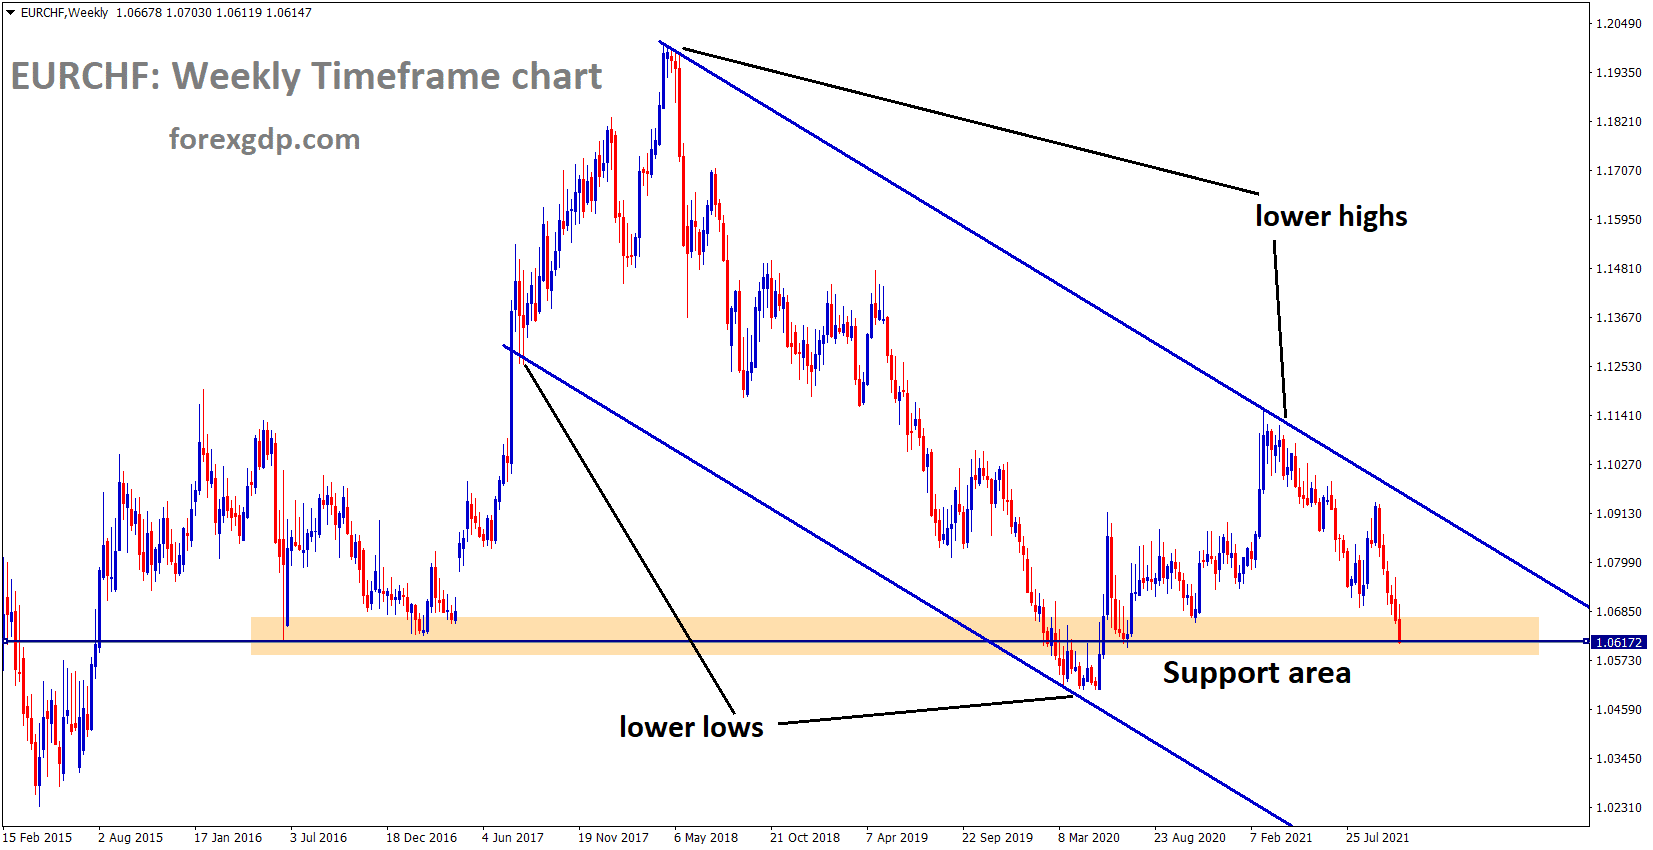 EURCHF is moving in the Descendingchannel and Market standing at the weekly support area.